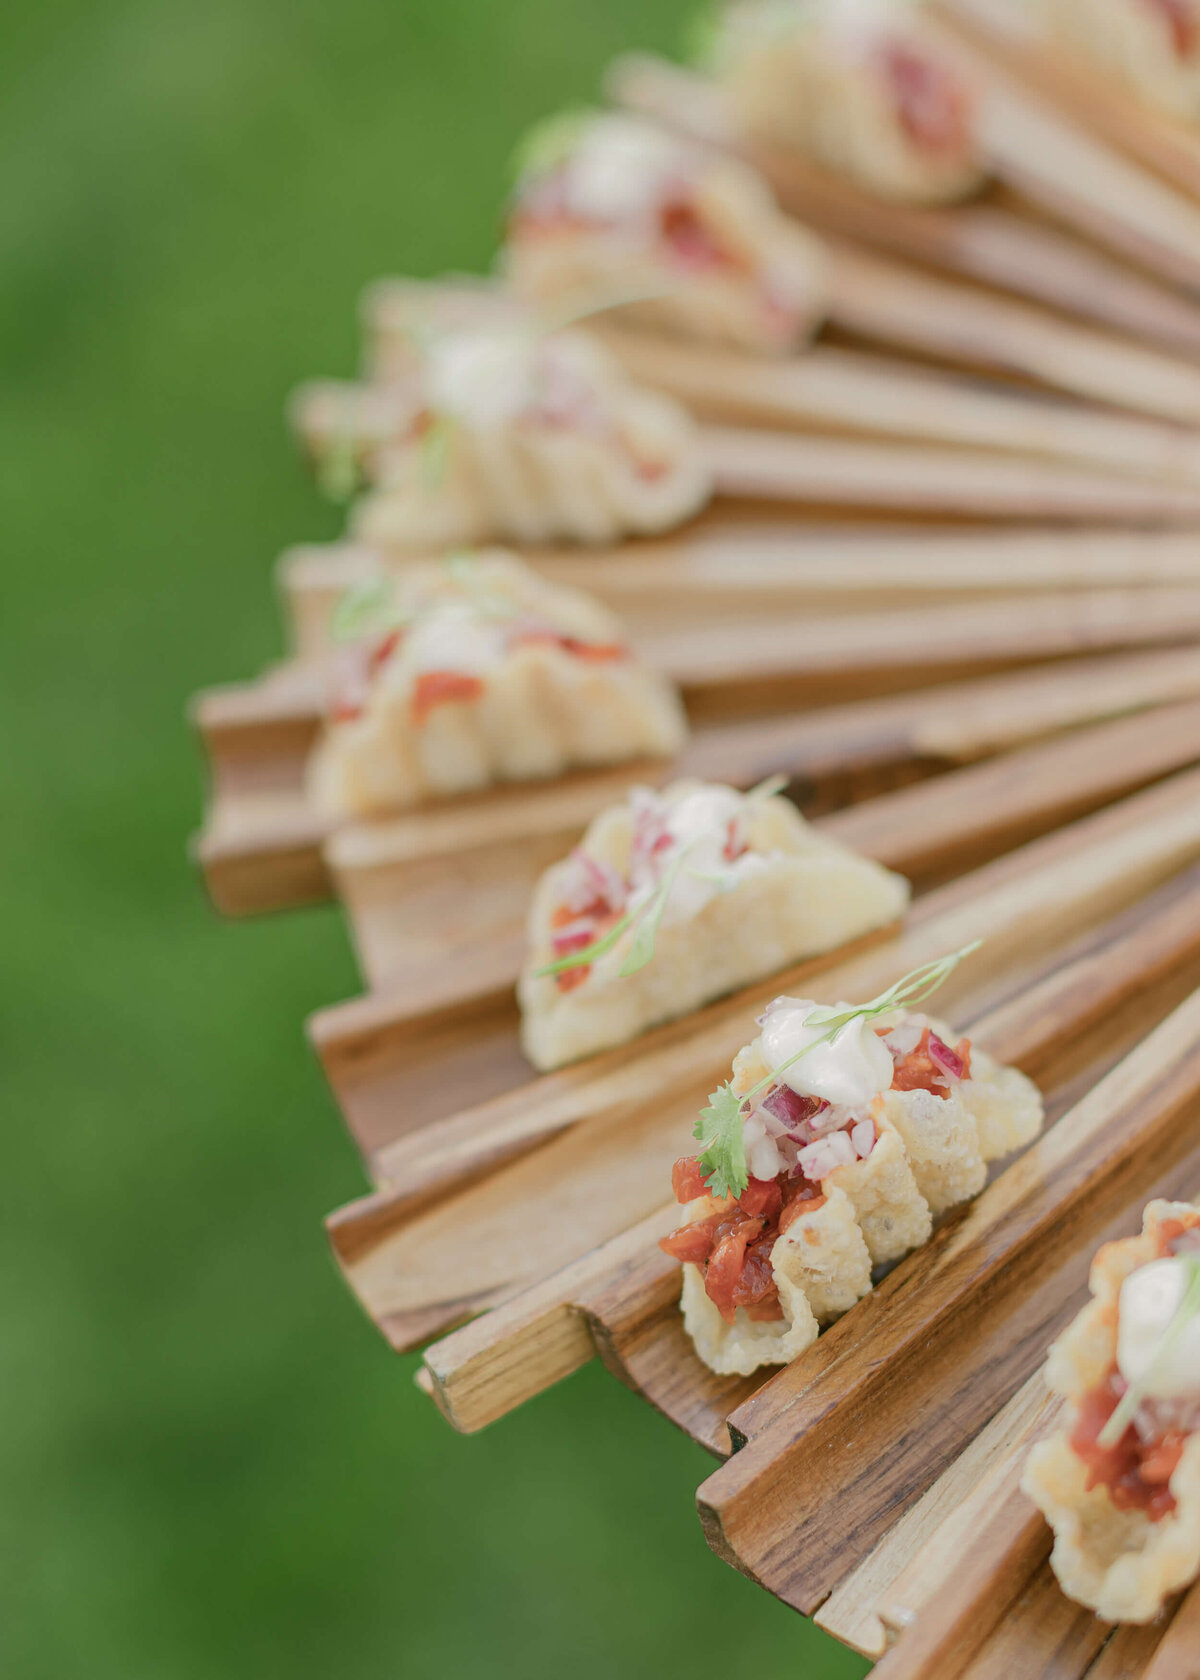 chloe-winstanley-weddings-syon-park-canapes-rhubarb-catering